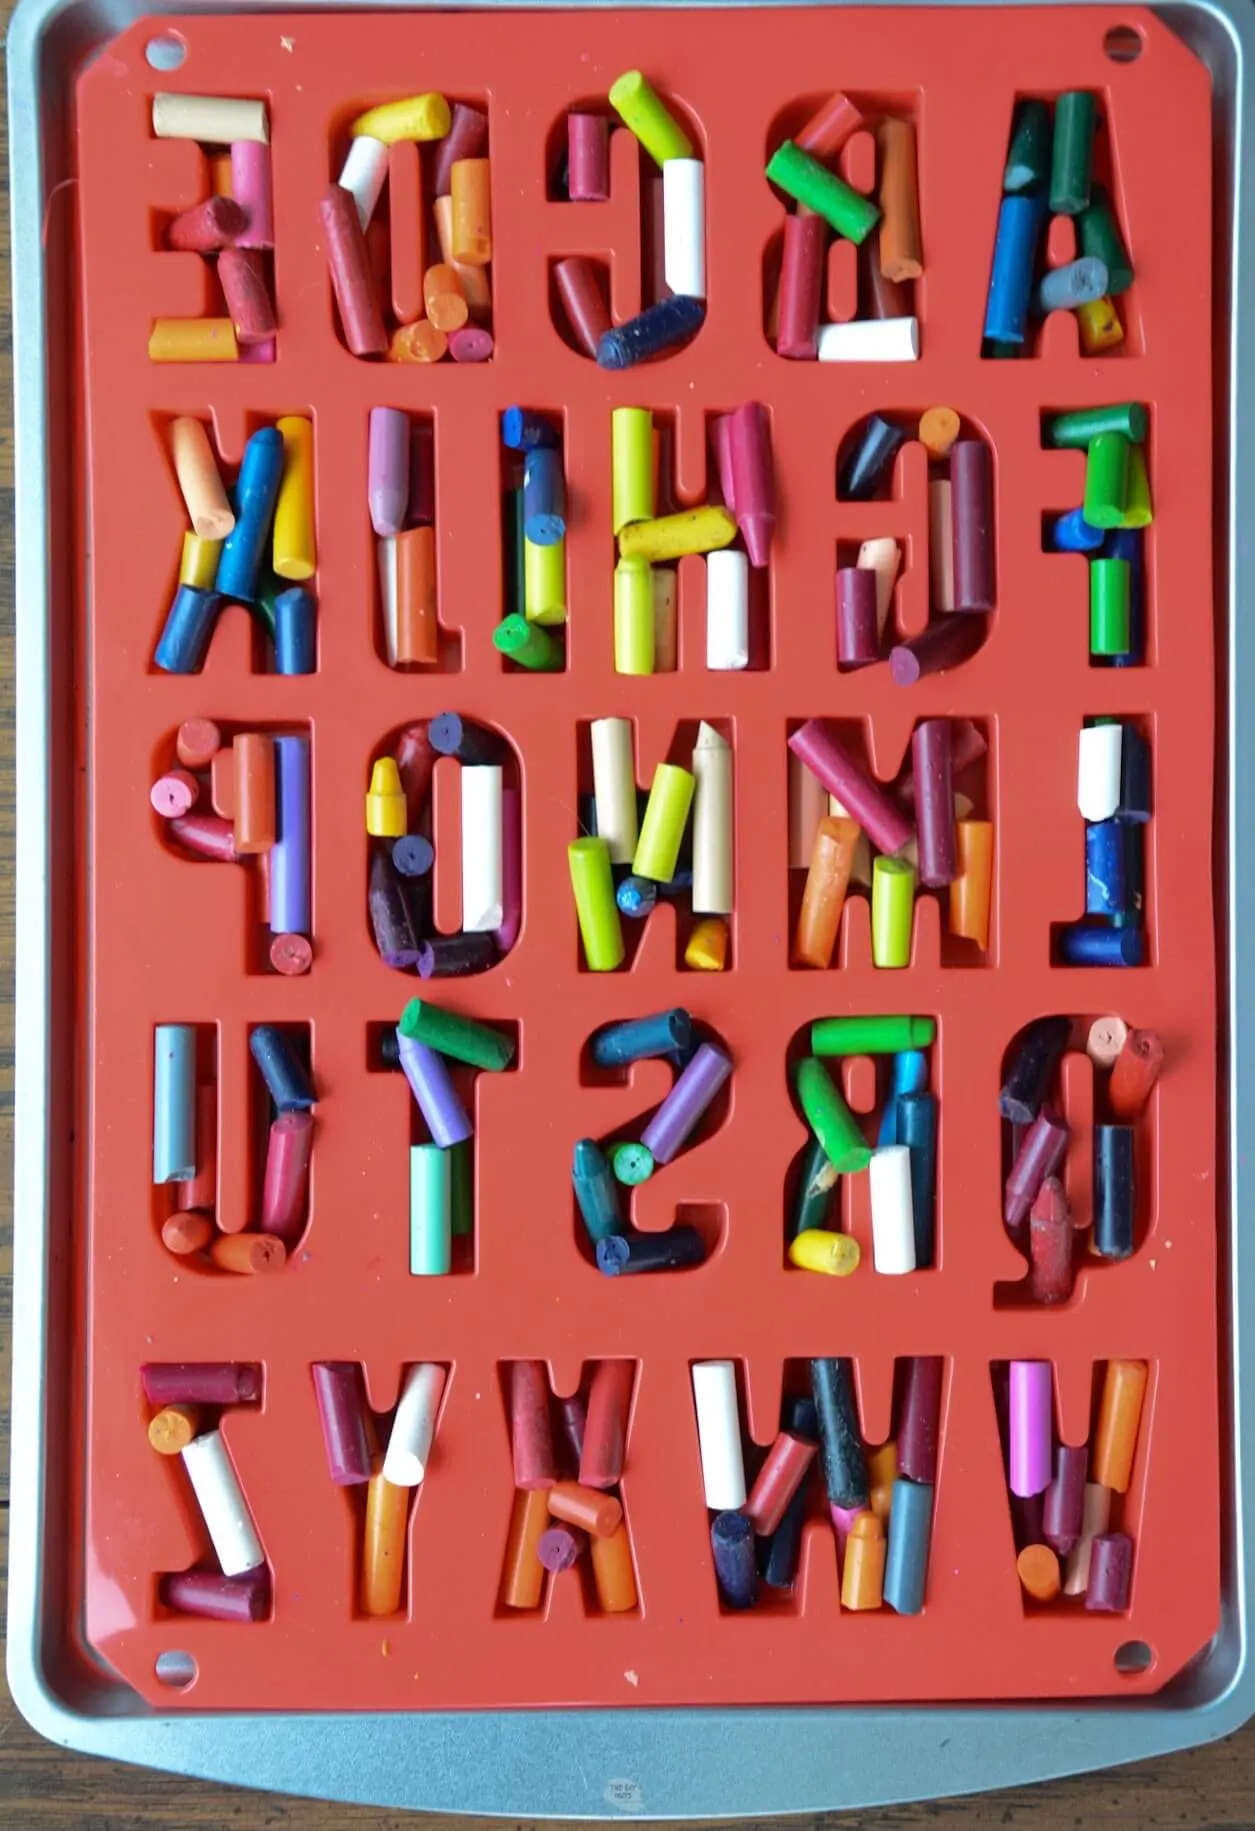 red letter molds filled with broken crayons.